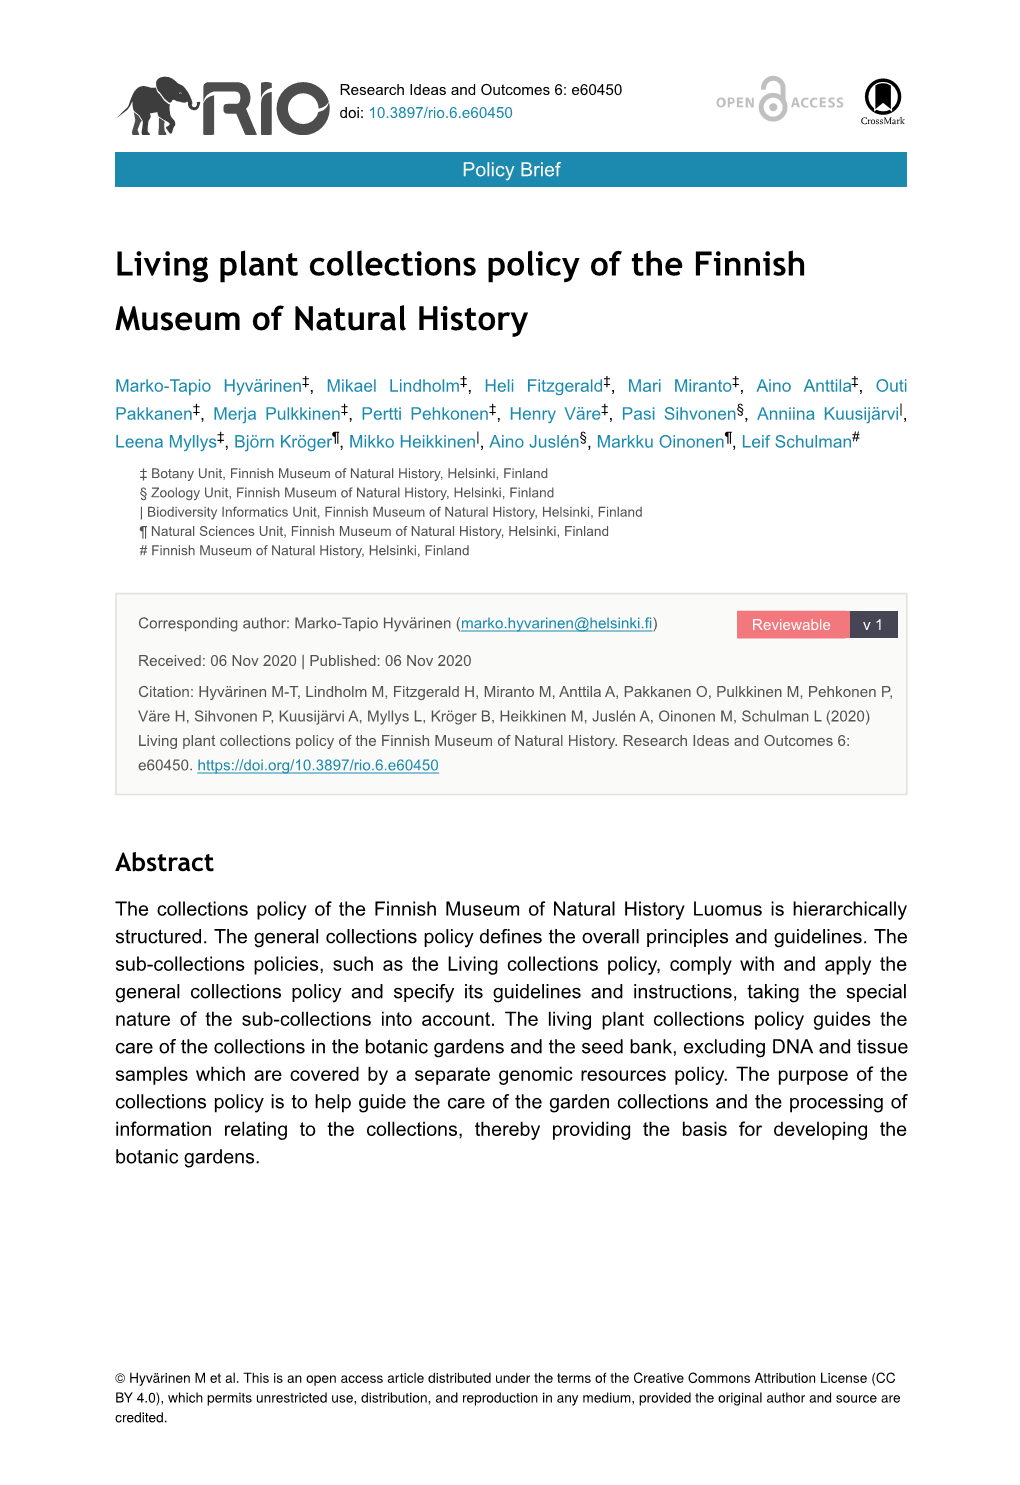 Living Plant Collections Policy of the Finnish Museum of Natural History